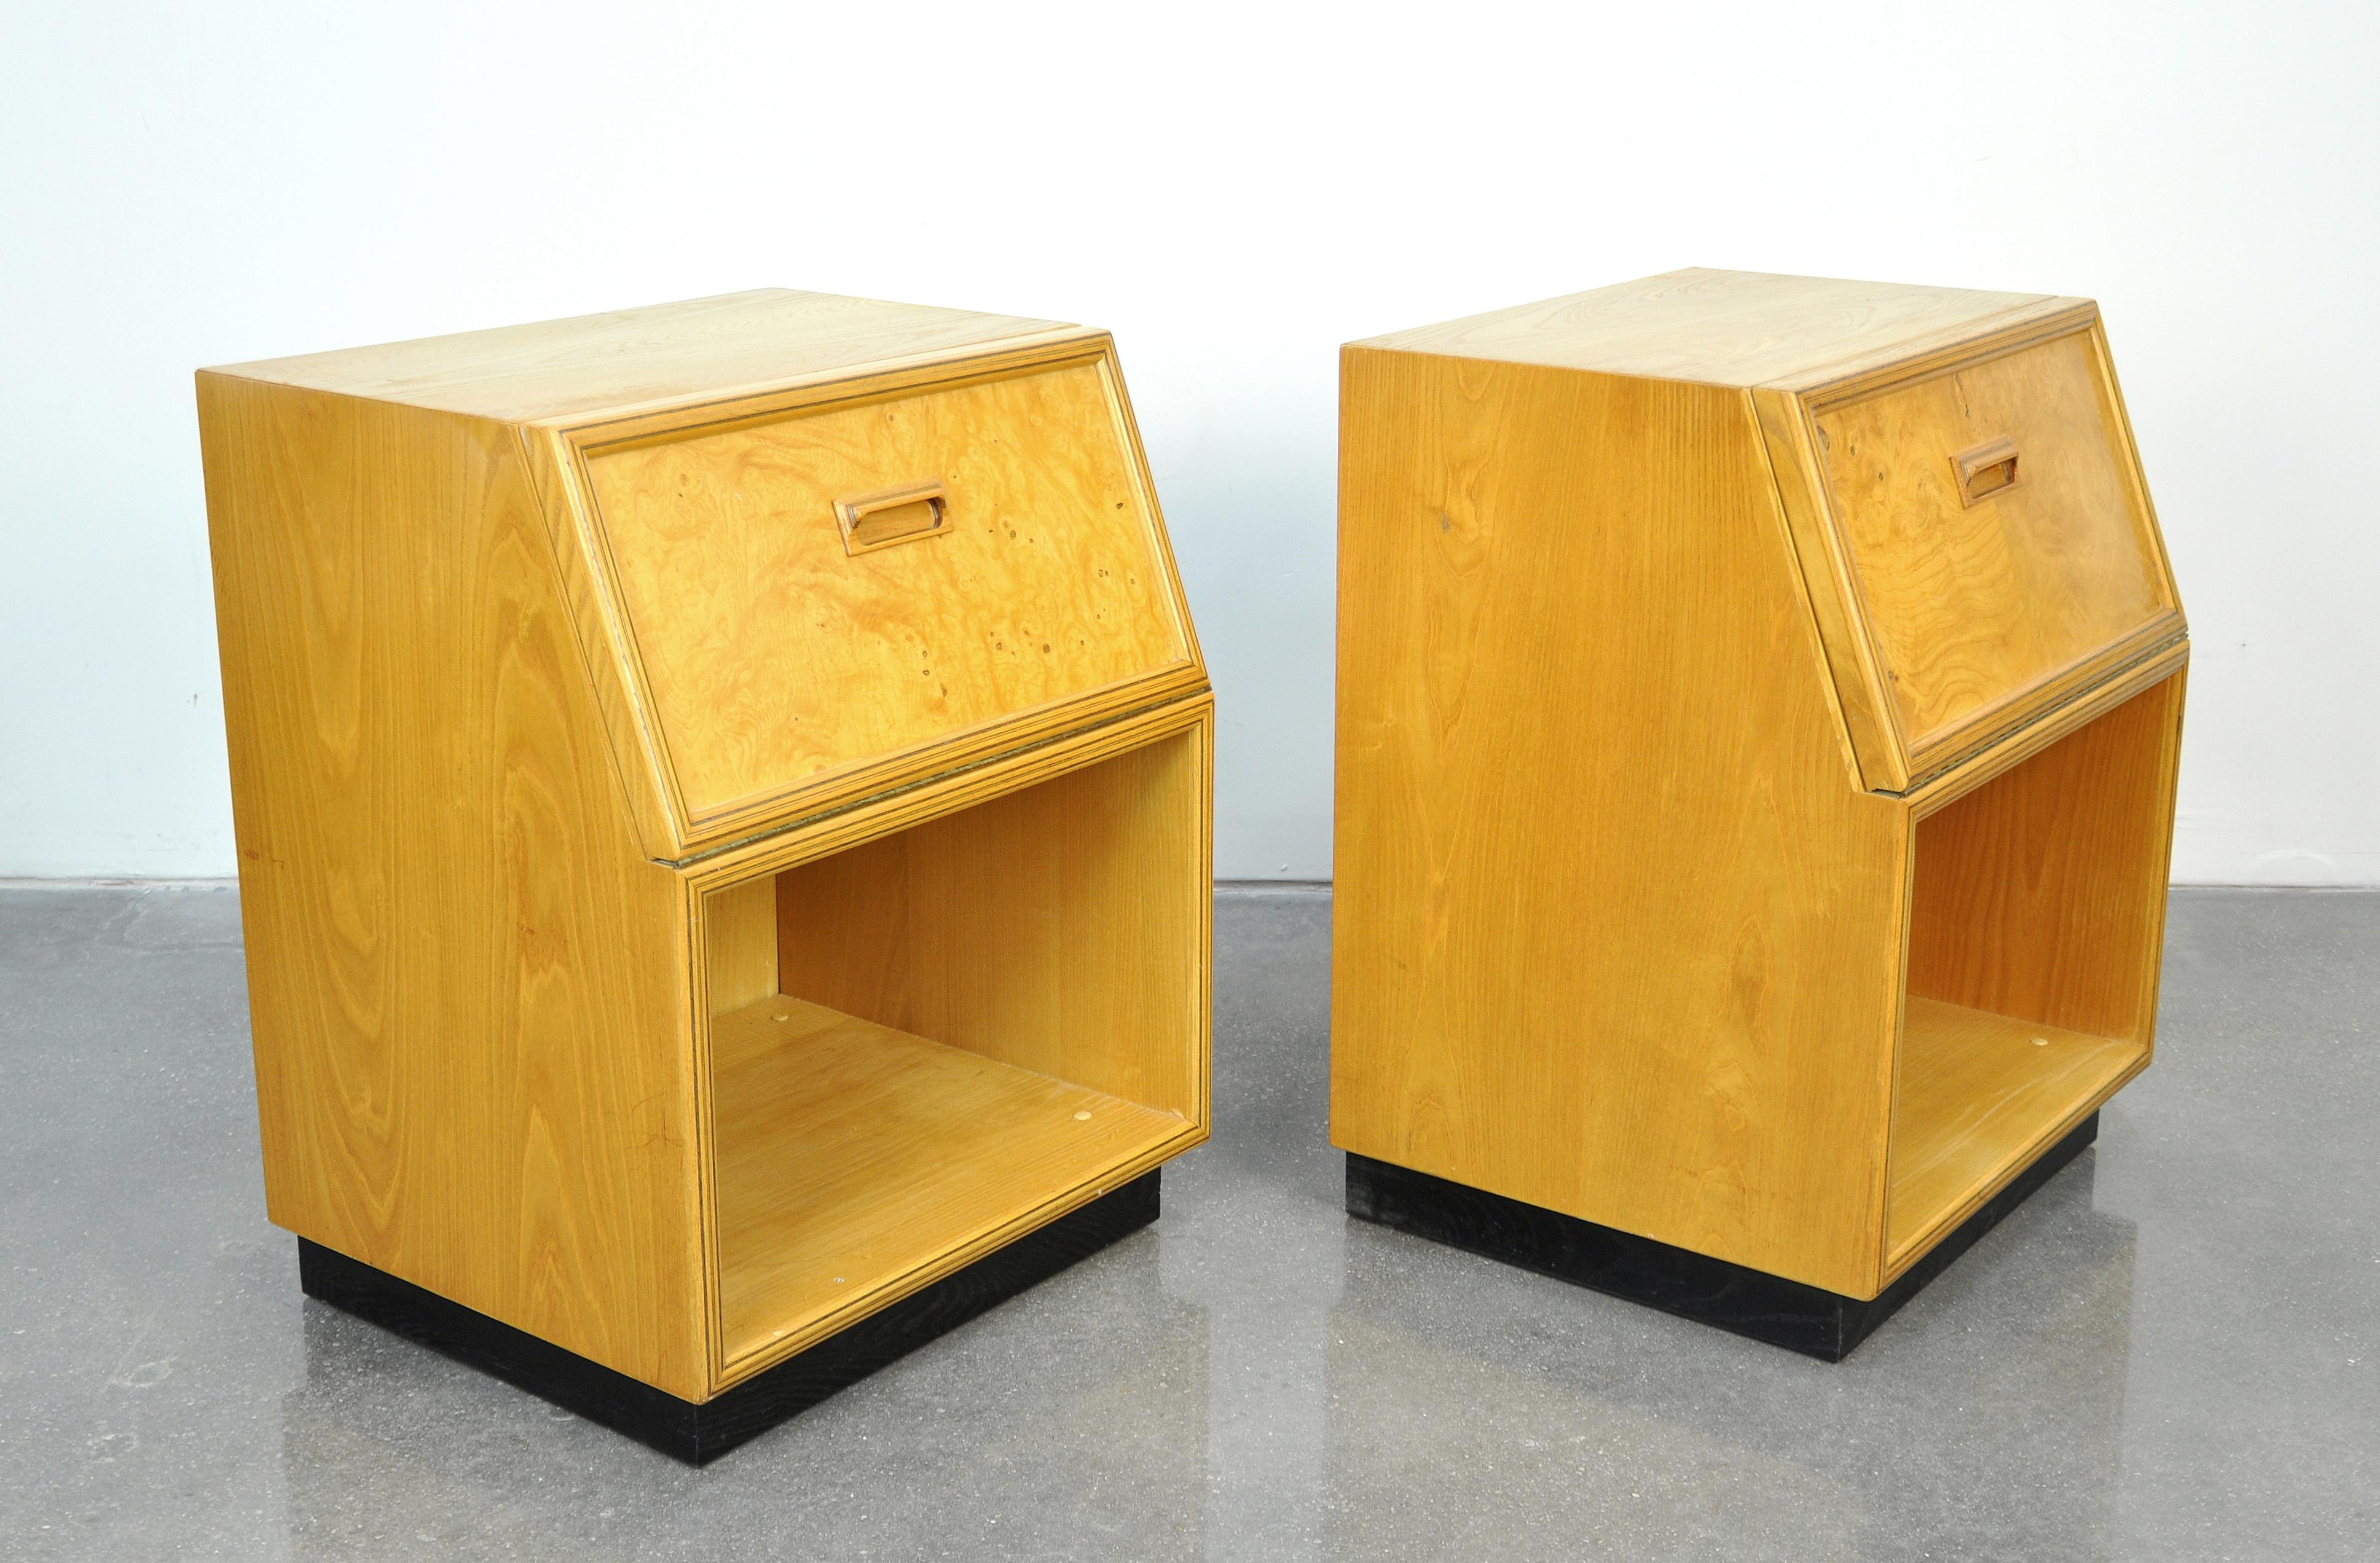 Pair of vintage Mid-Century Modern olivewood burl side or end tables from the desirable scene 2 collection manufactured by Henredon in the 1970s and 1980s. The bedside or occasional tables feature a fall front cabinet door with sculpted handles and